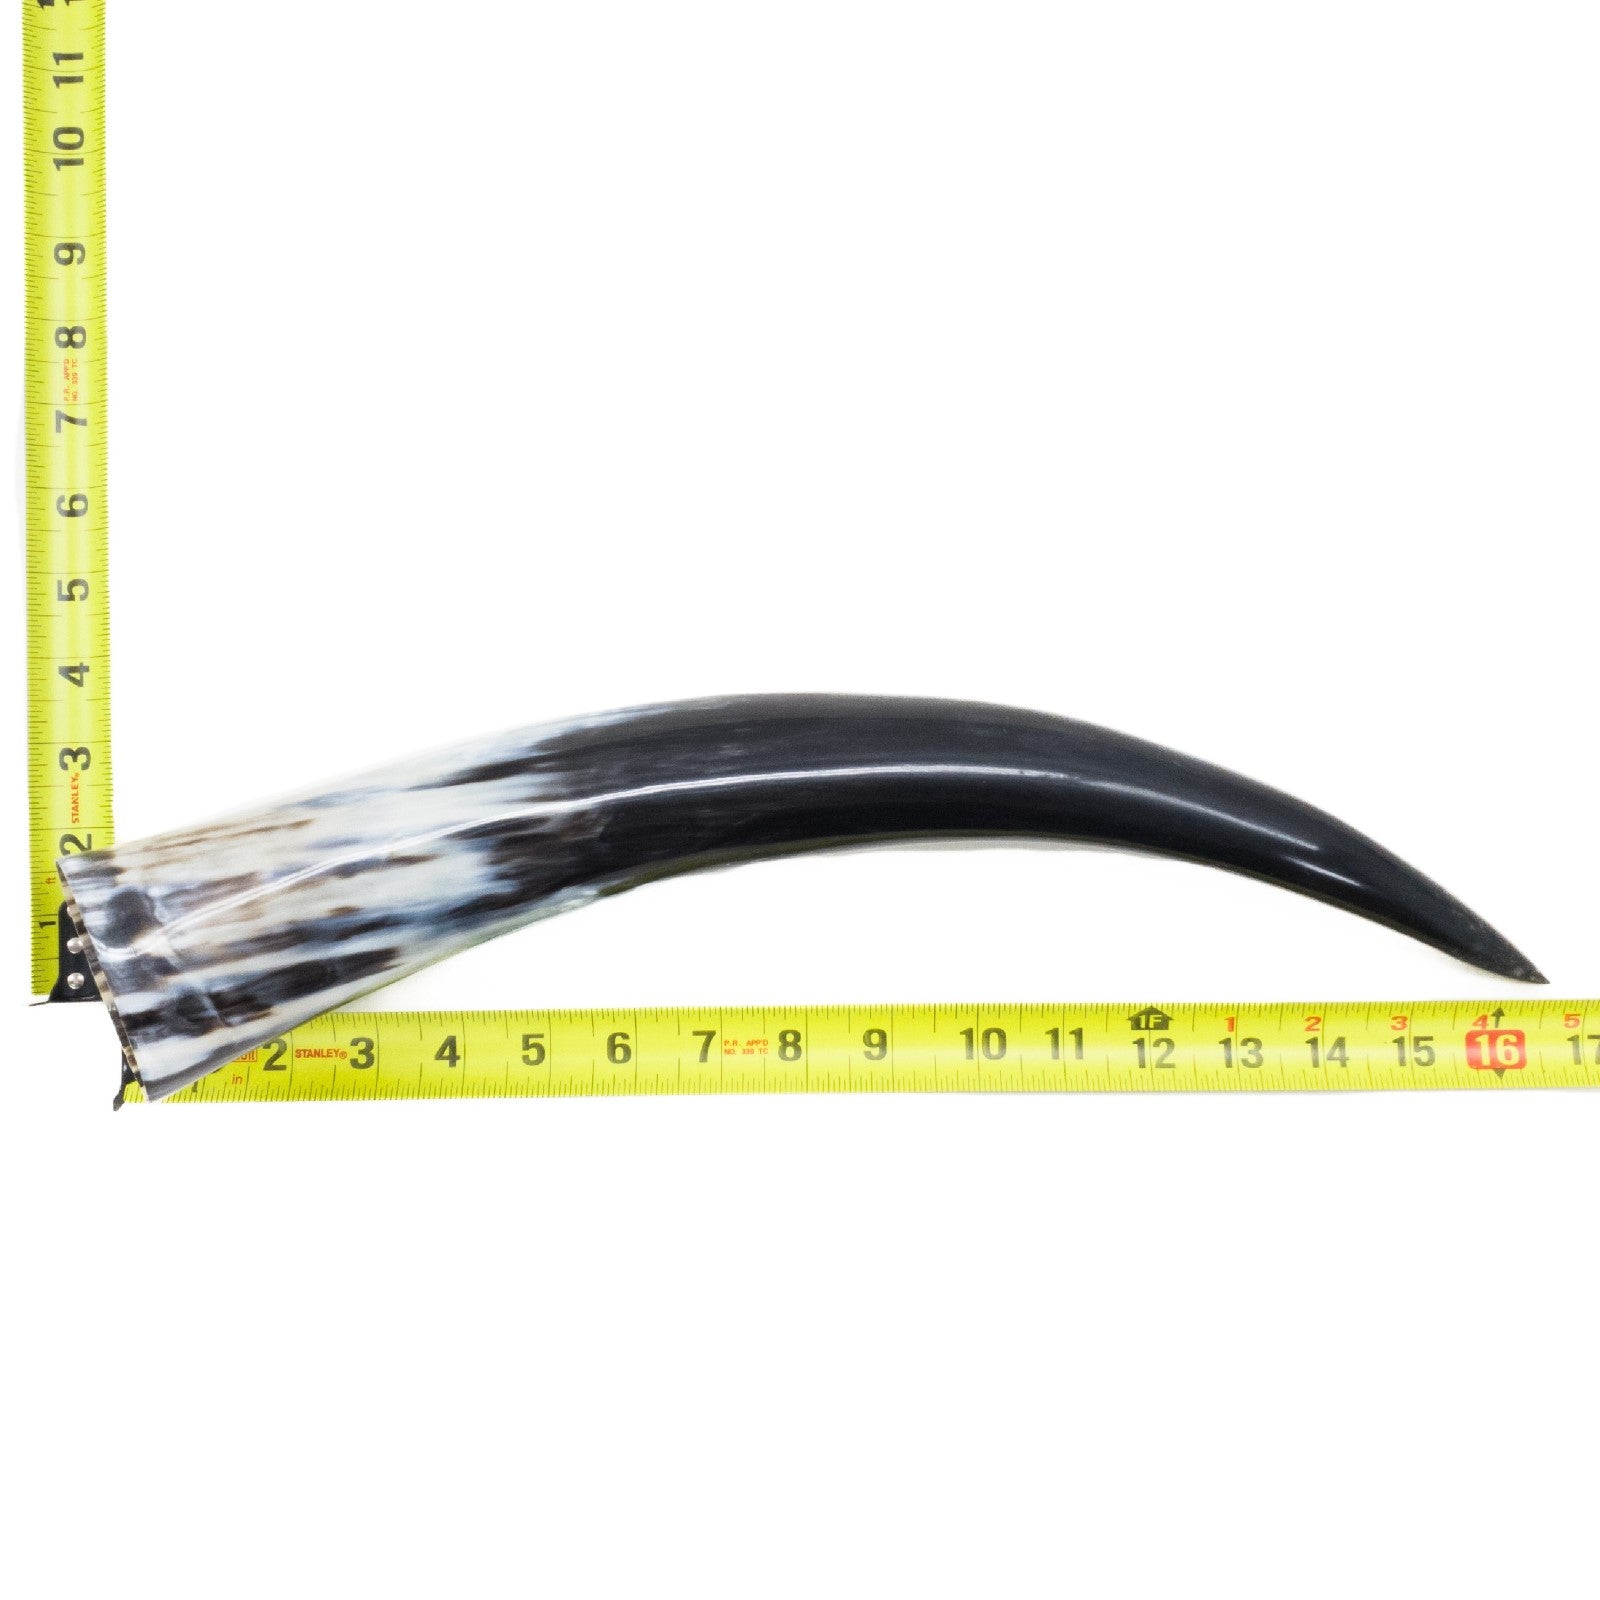 13" - 17" Single Polished Cow Horns, 29 (16") | The Leather Guy